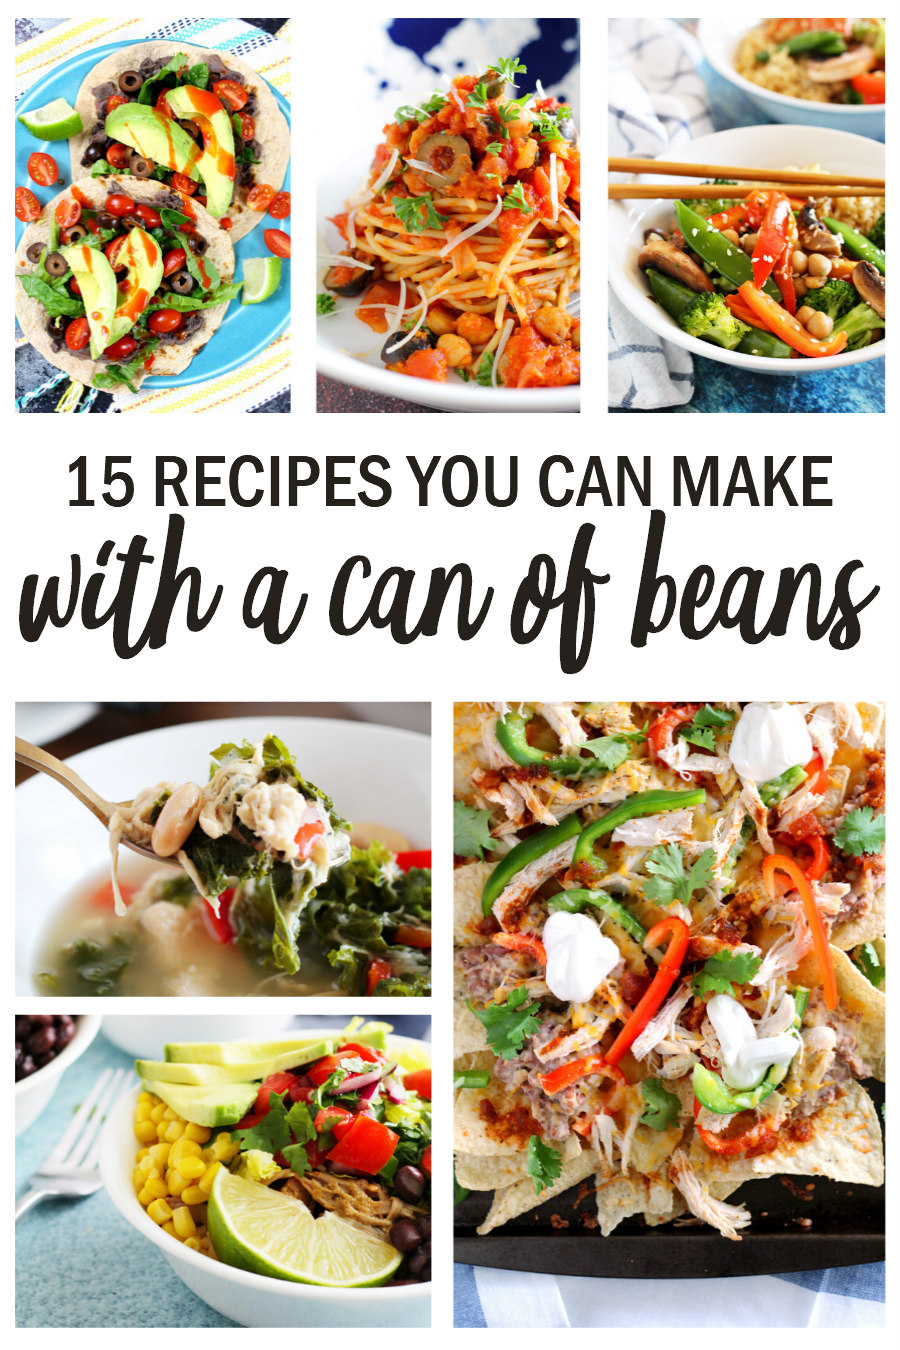 canned beans recipes